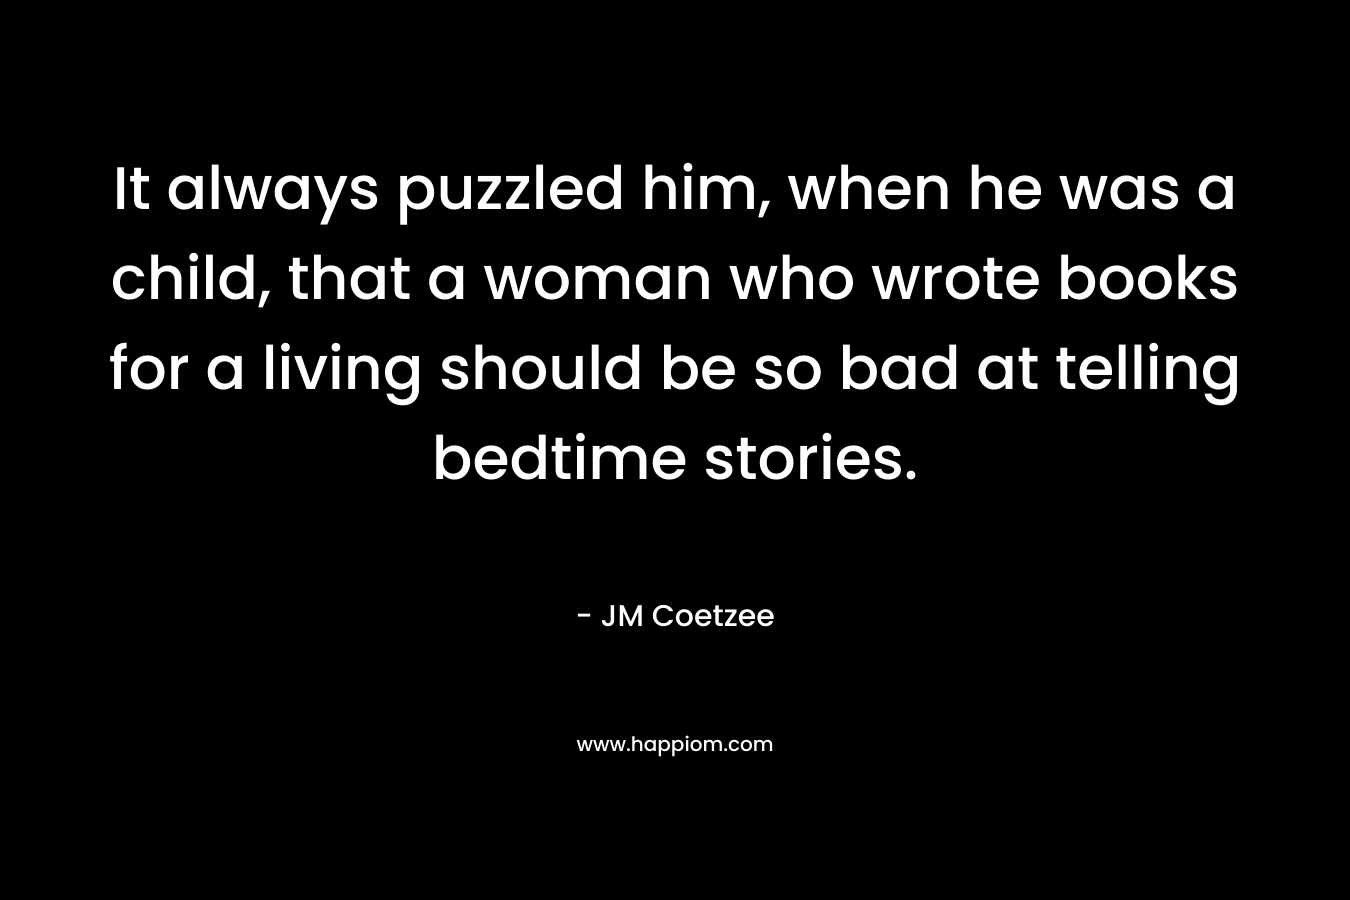 It always puzzled him, when he was a child, that a woman who wrote books for a living should be so bad at telling bedtime stories. – JM Coetzee